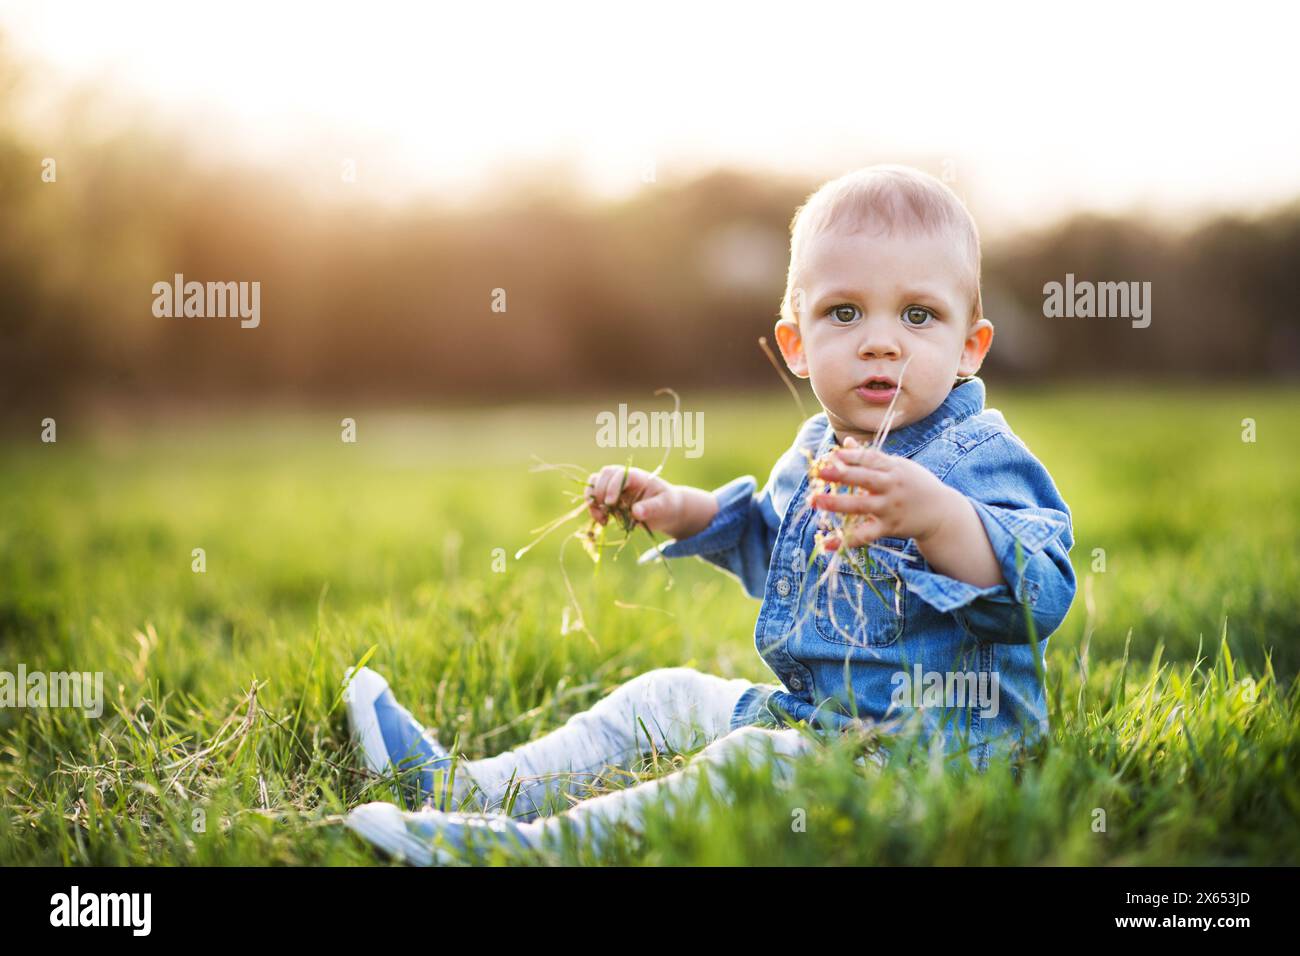 Cute toddler playing in grass. Baby on family walk k in spring nature. Happy family moment for new parents. Portrait. Stock Photo